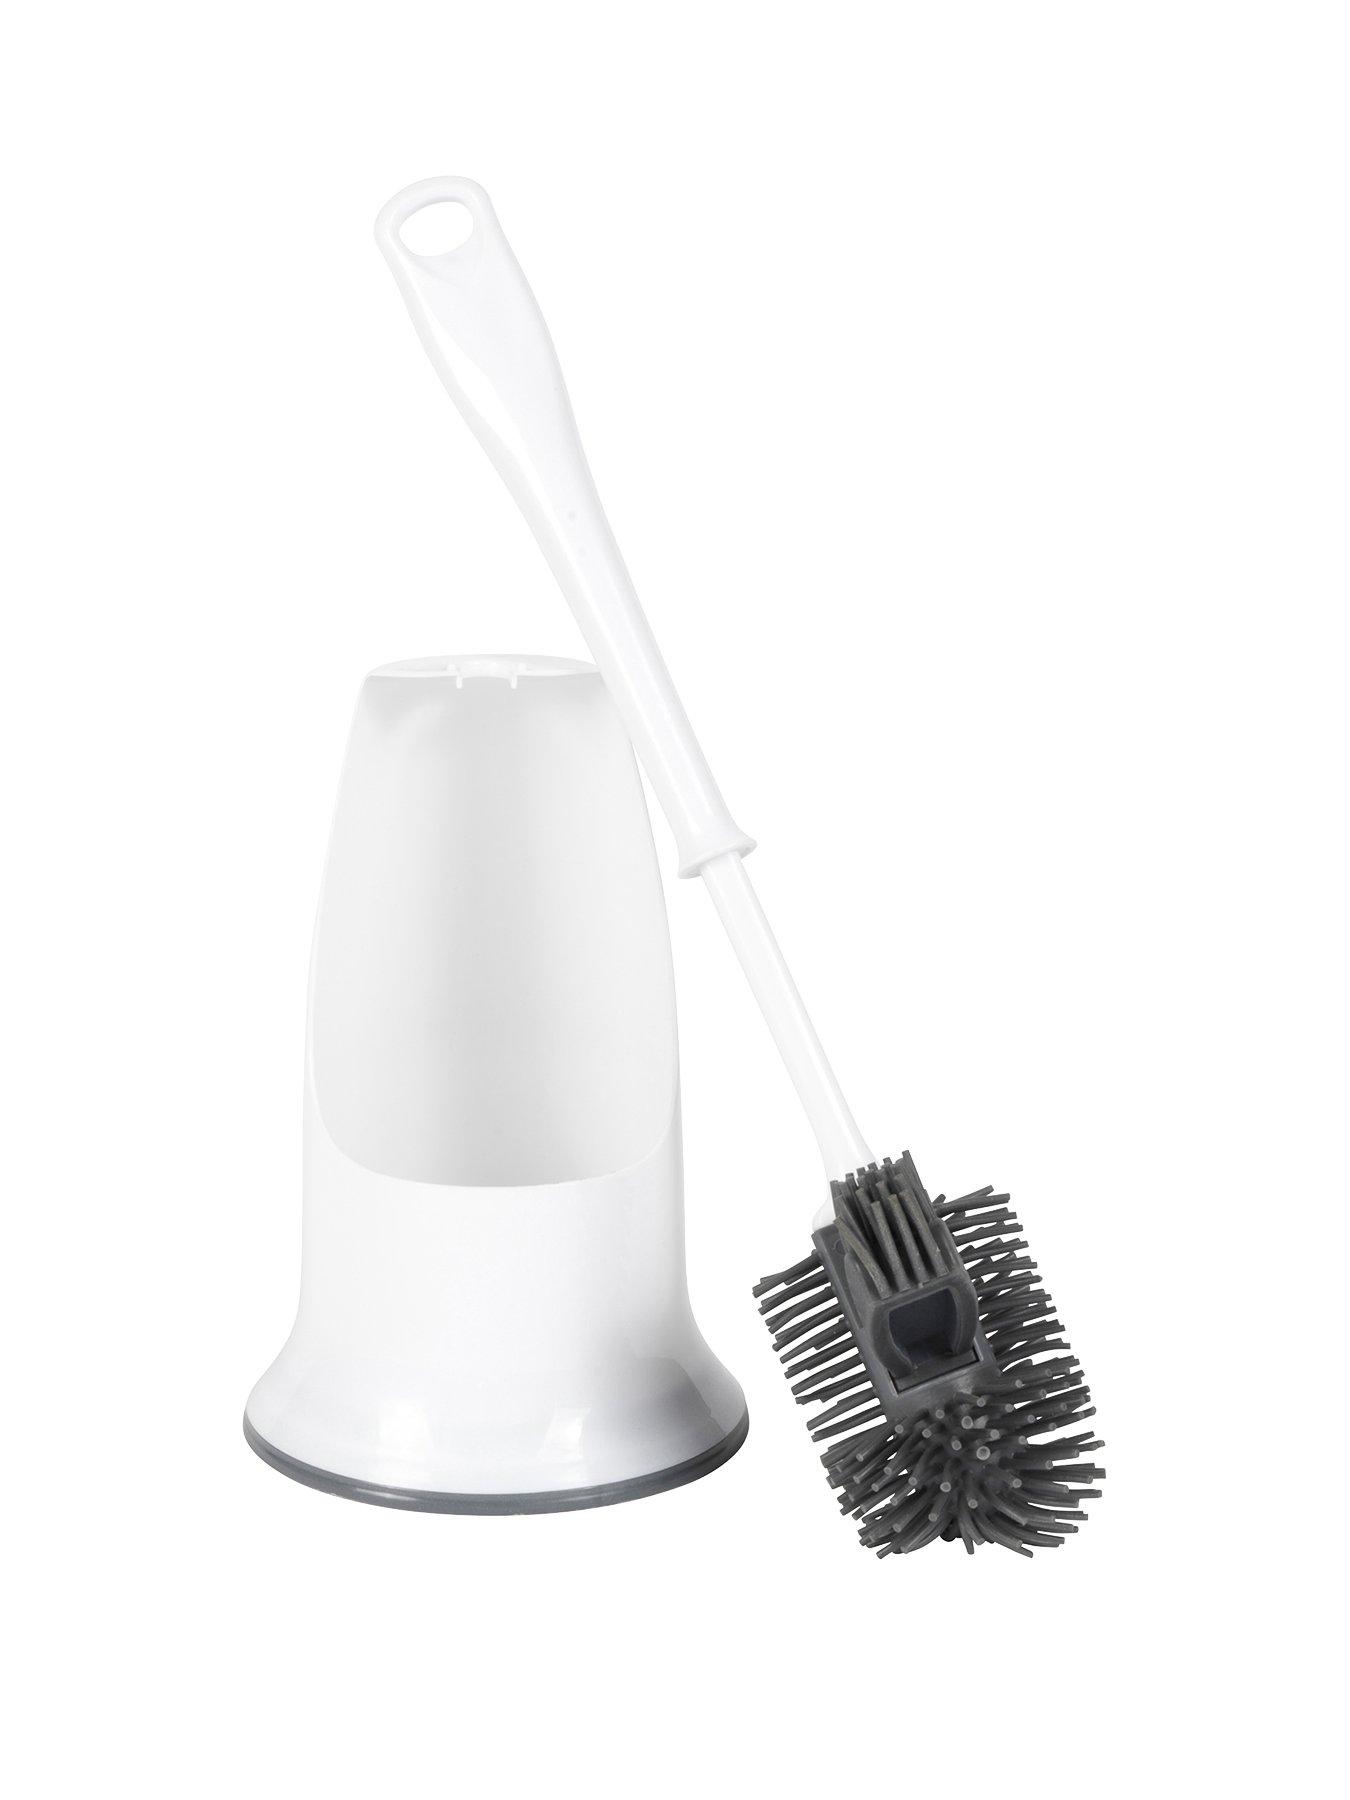 Do Silicone Toilet Brushes Work? Are They Hygienic?